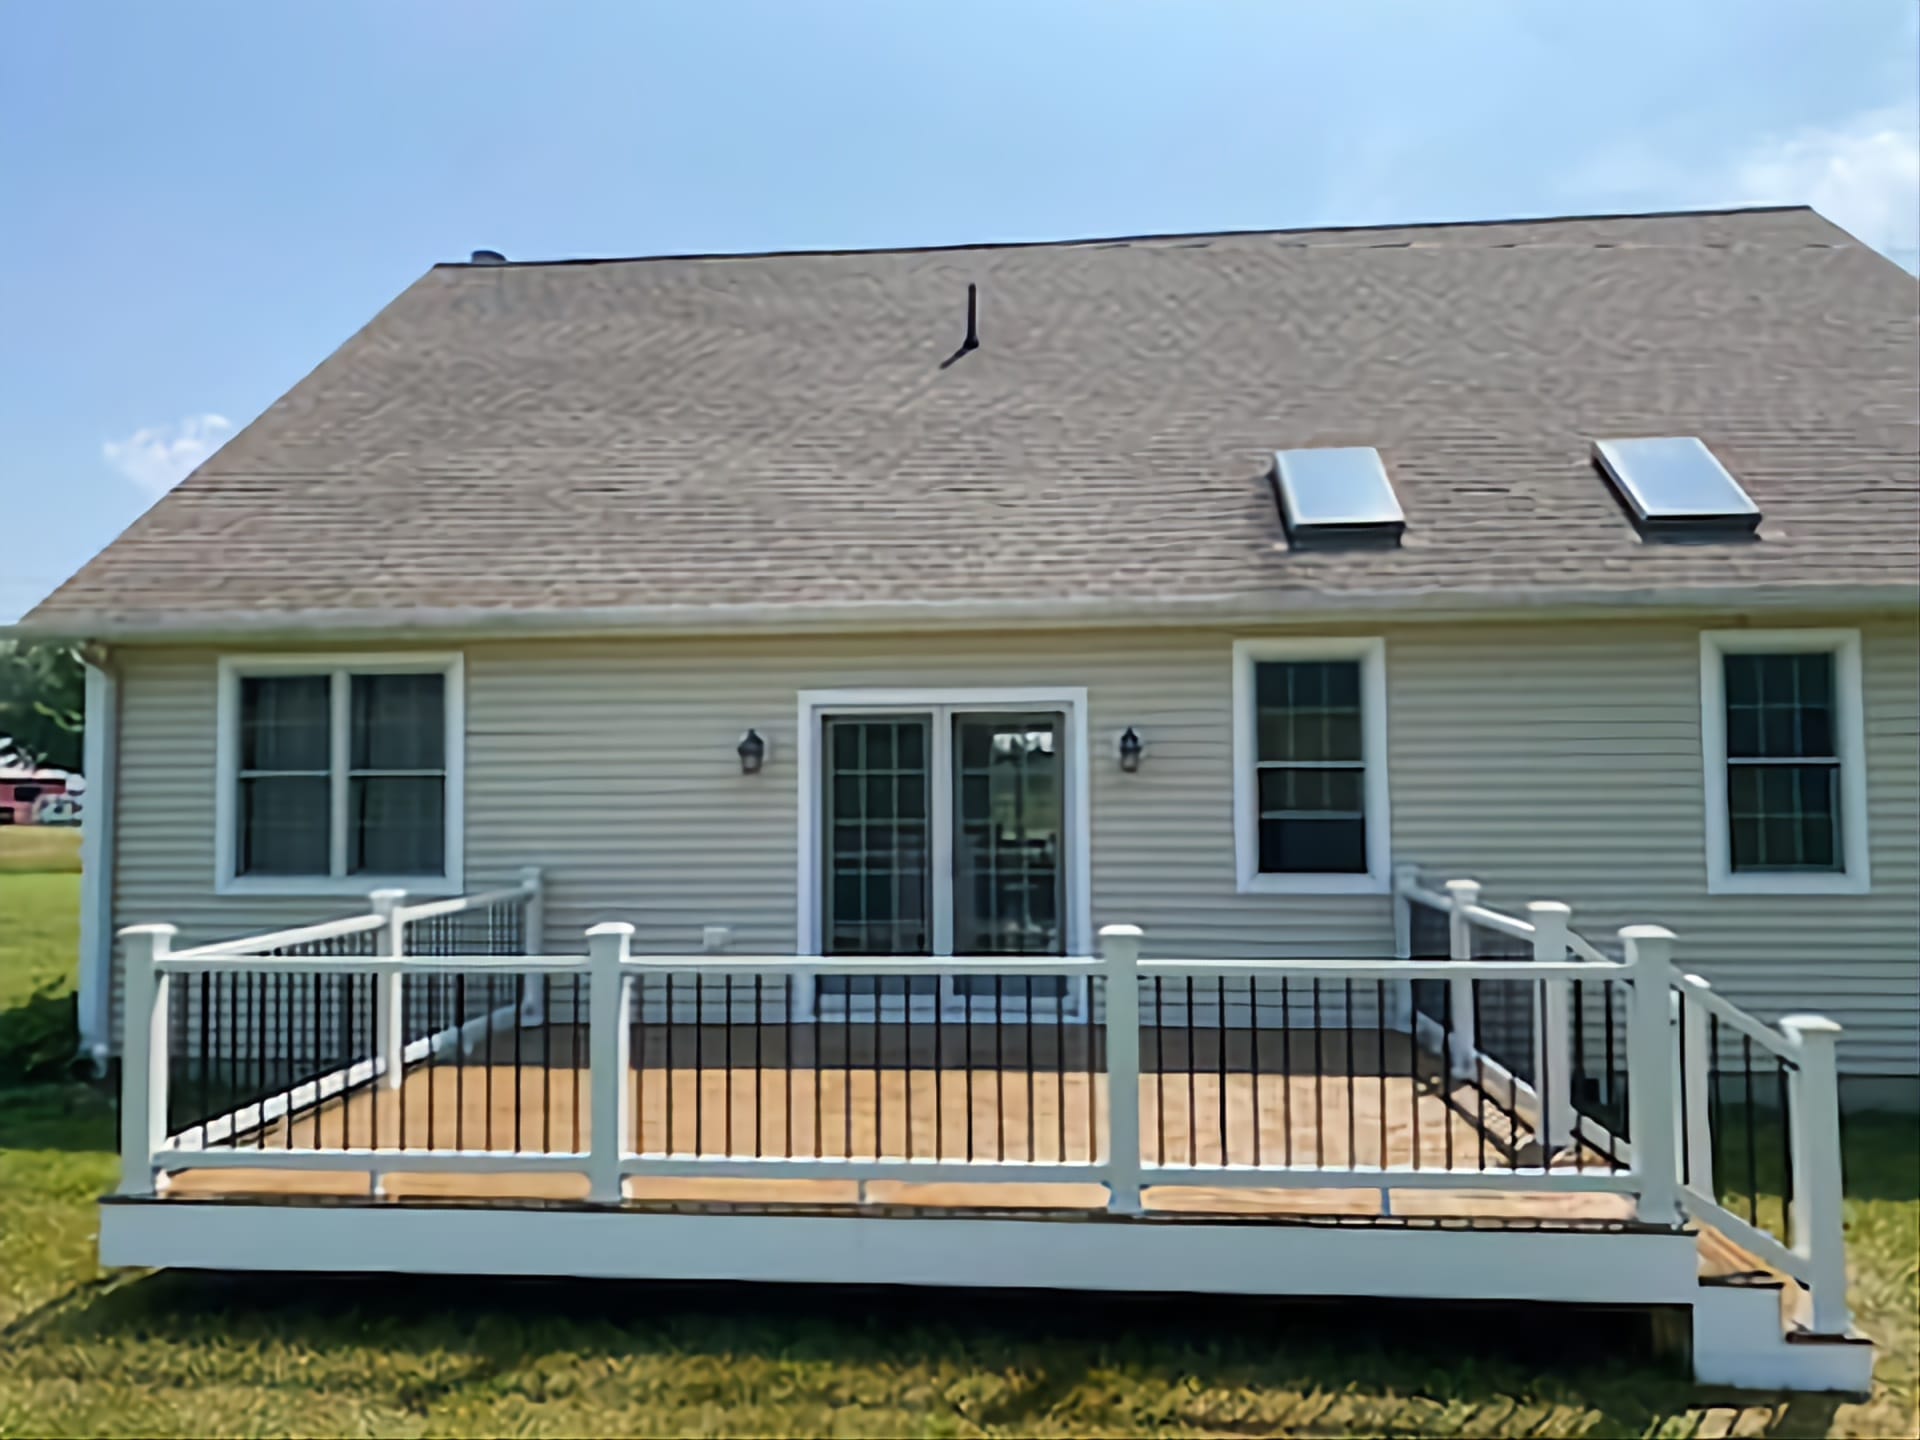 The Advantages of Installing Trex Composite Decking in Your Lake County, Ohio Home